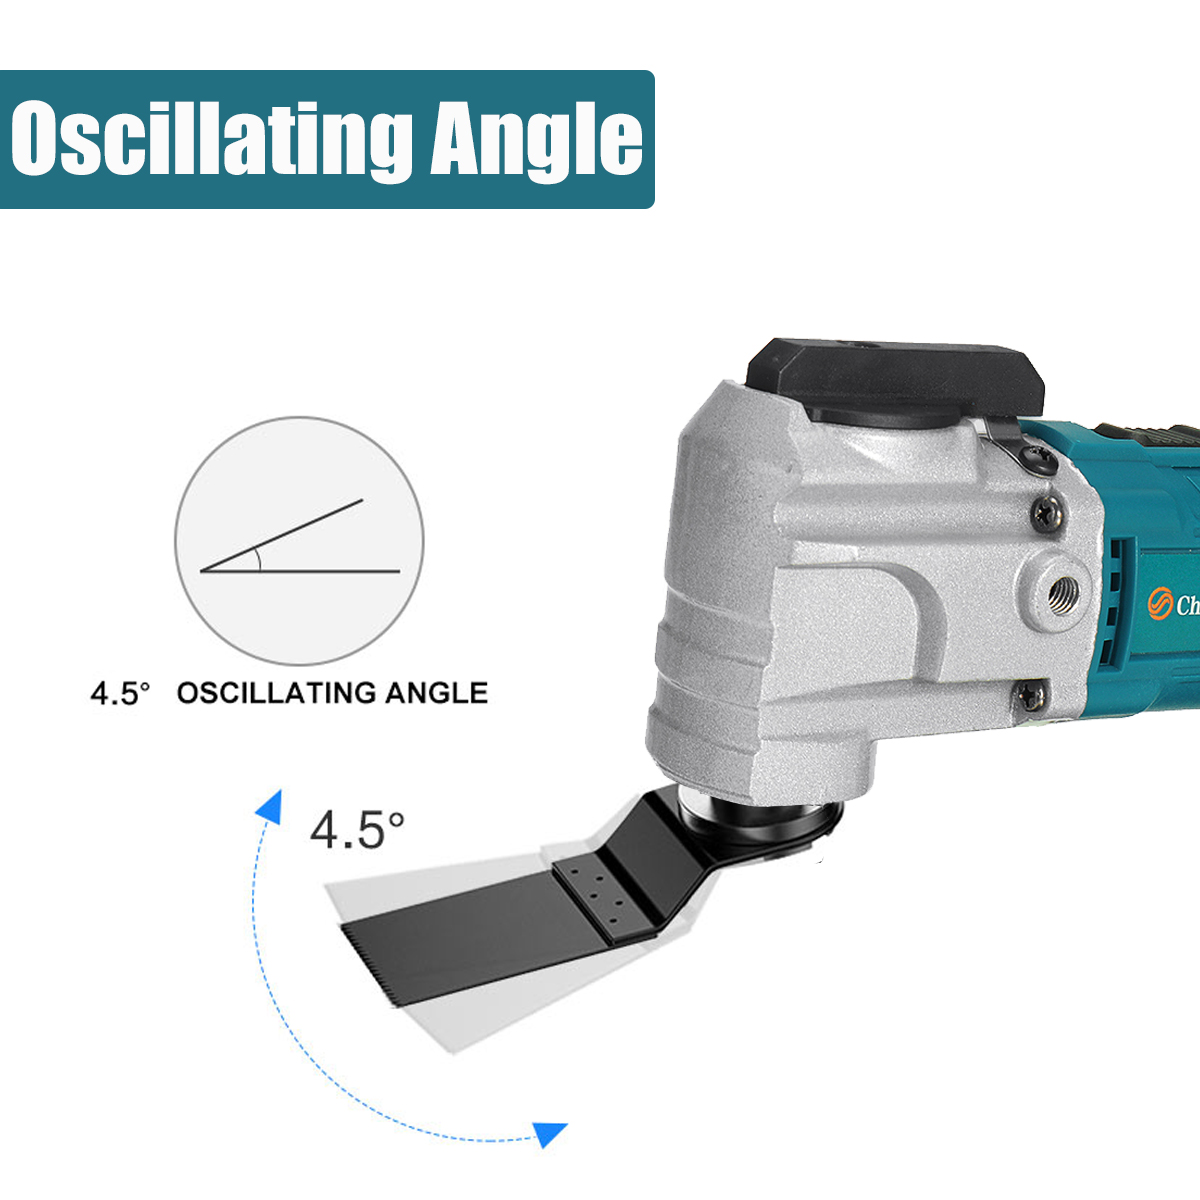 25mm-6-Speed-Brushless-Rechargeable-Angle-Grinder-Cordless-Electric-Grinder-Polishing-Machine-Oscill-1914411-7